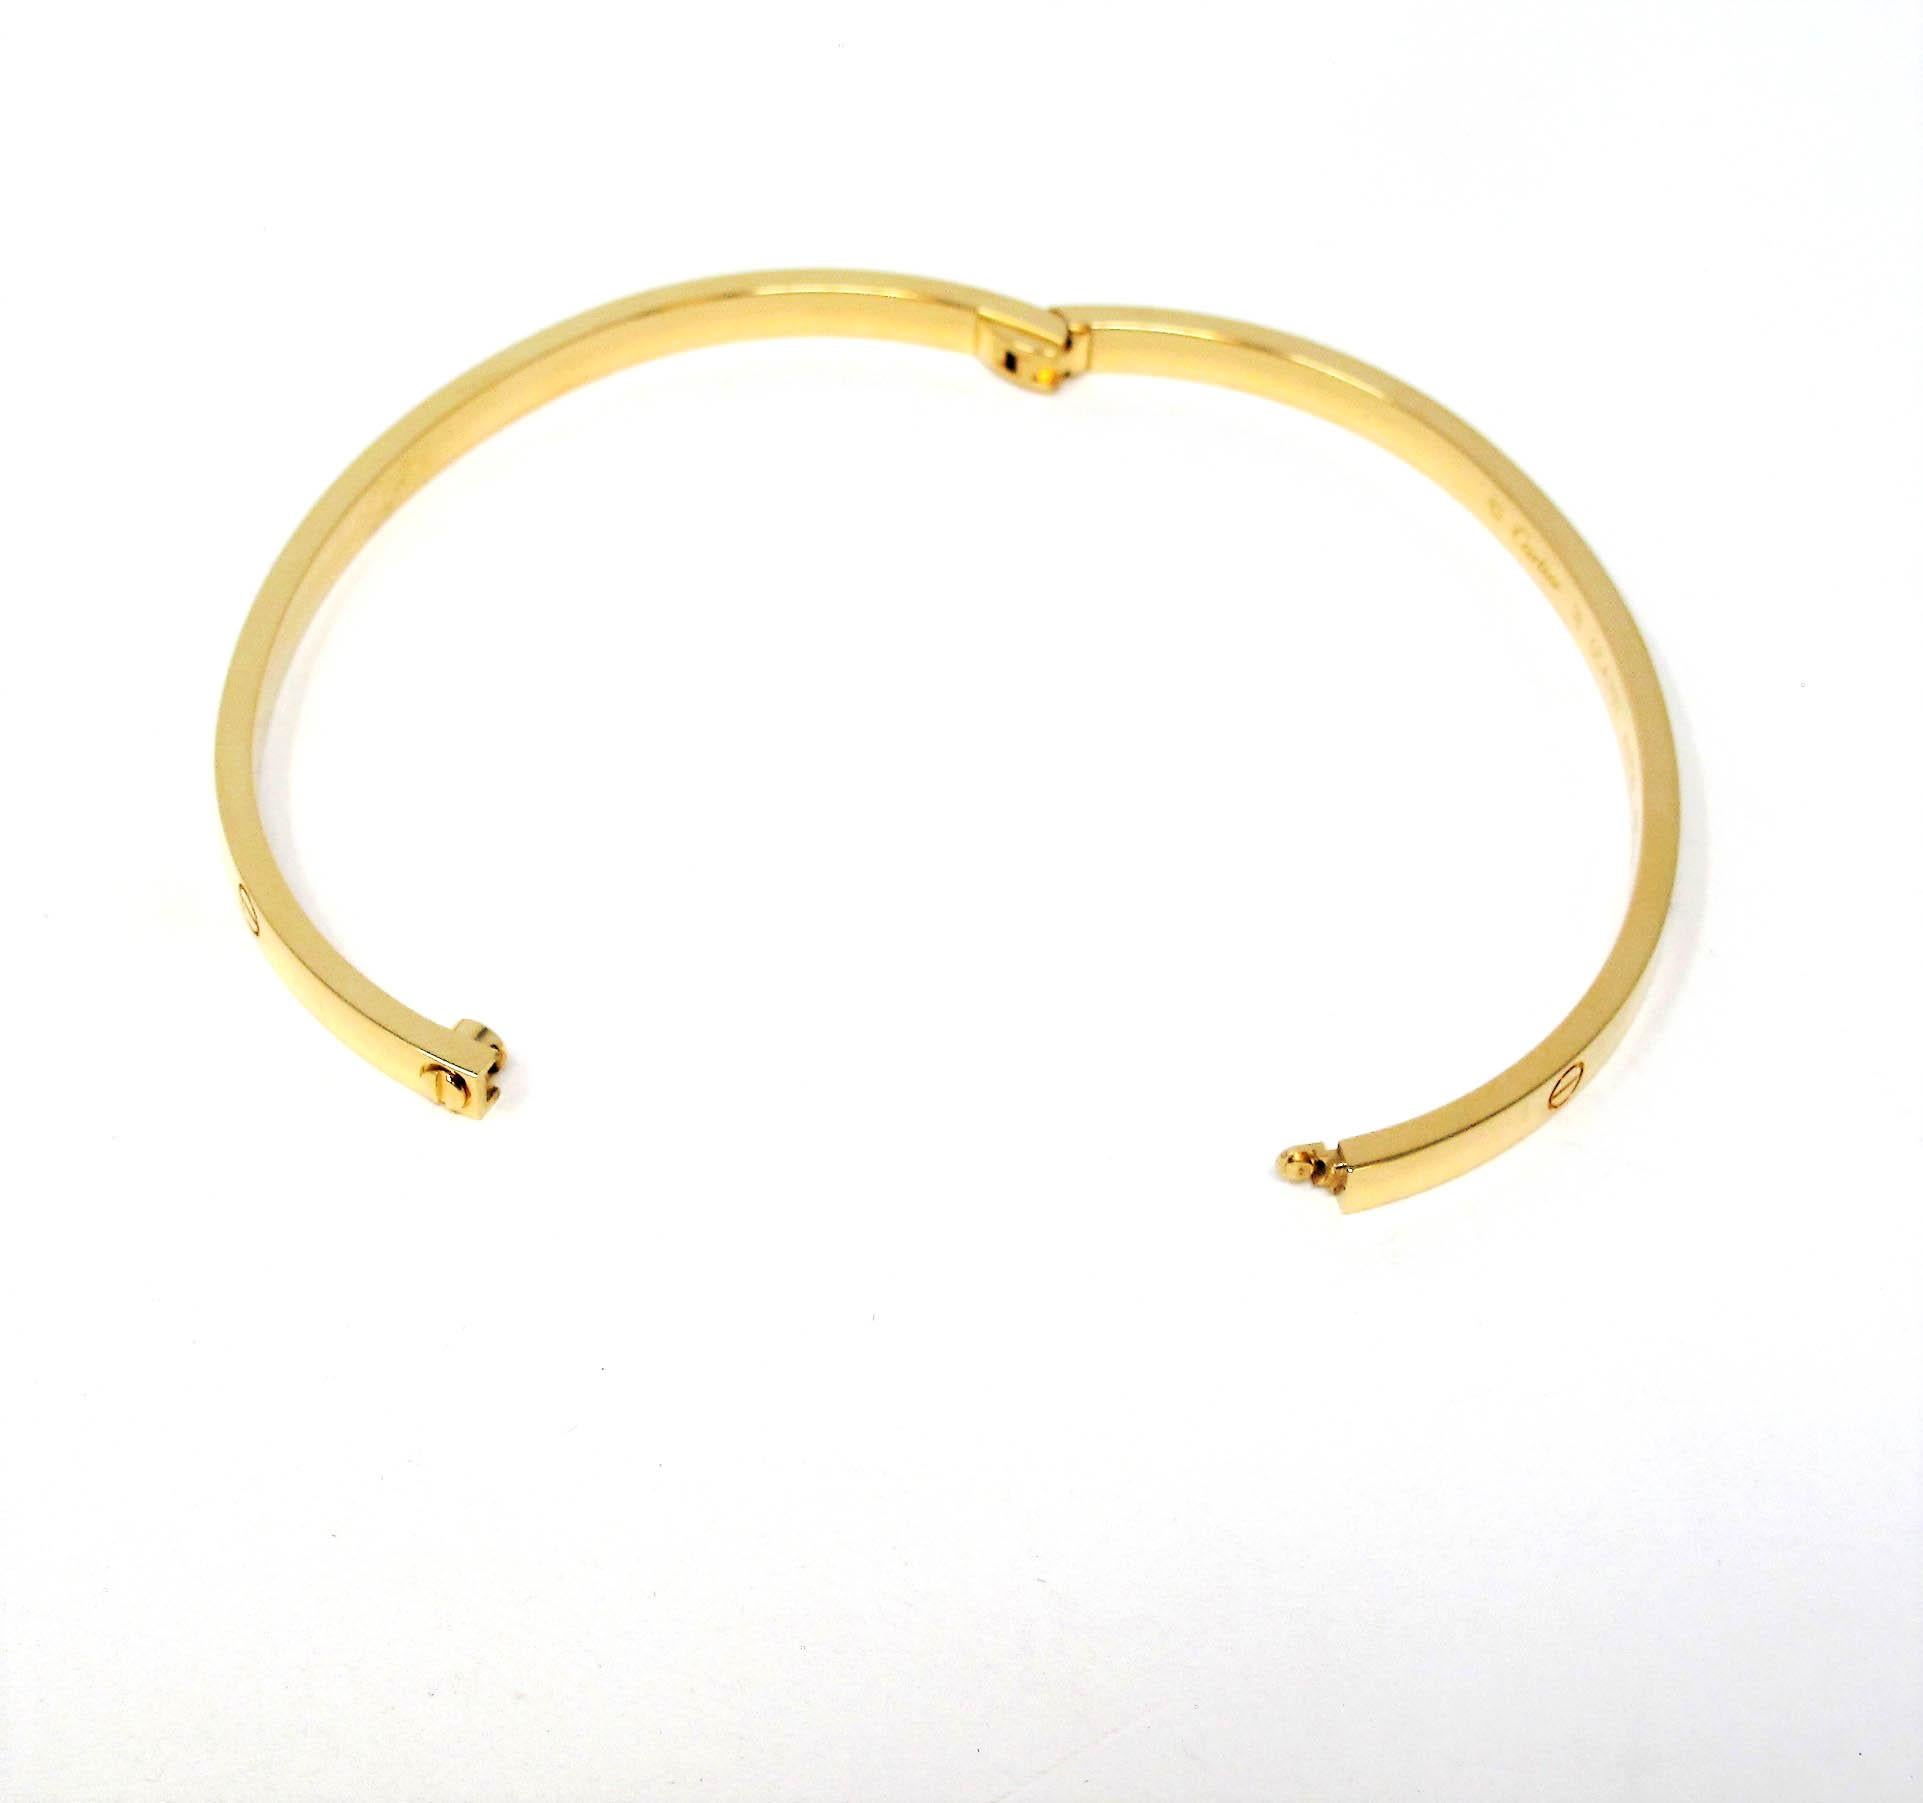 Women's or Men's Cartier Love Collection Small 18 Karat Yellow Gold Bangle Bracelet with Box